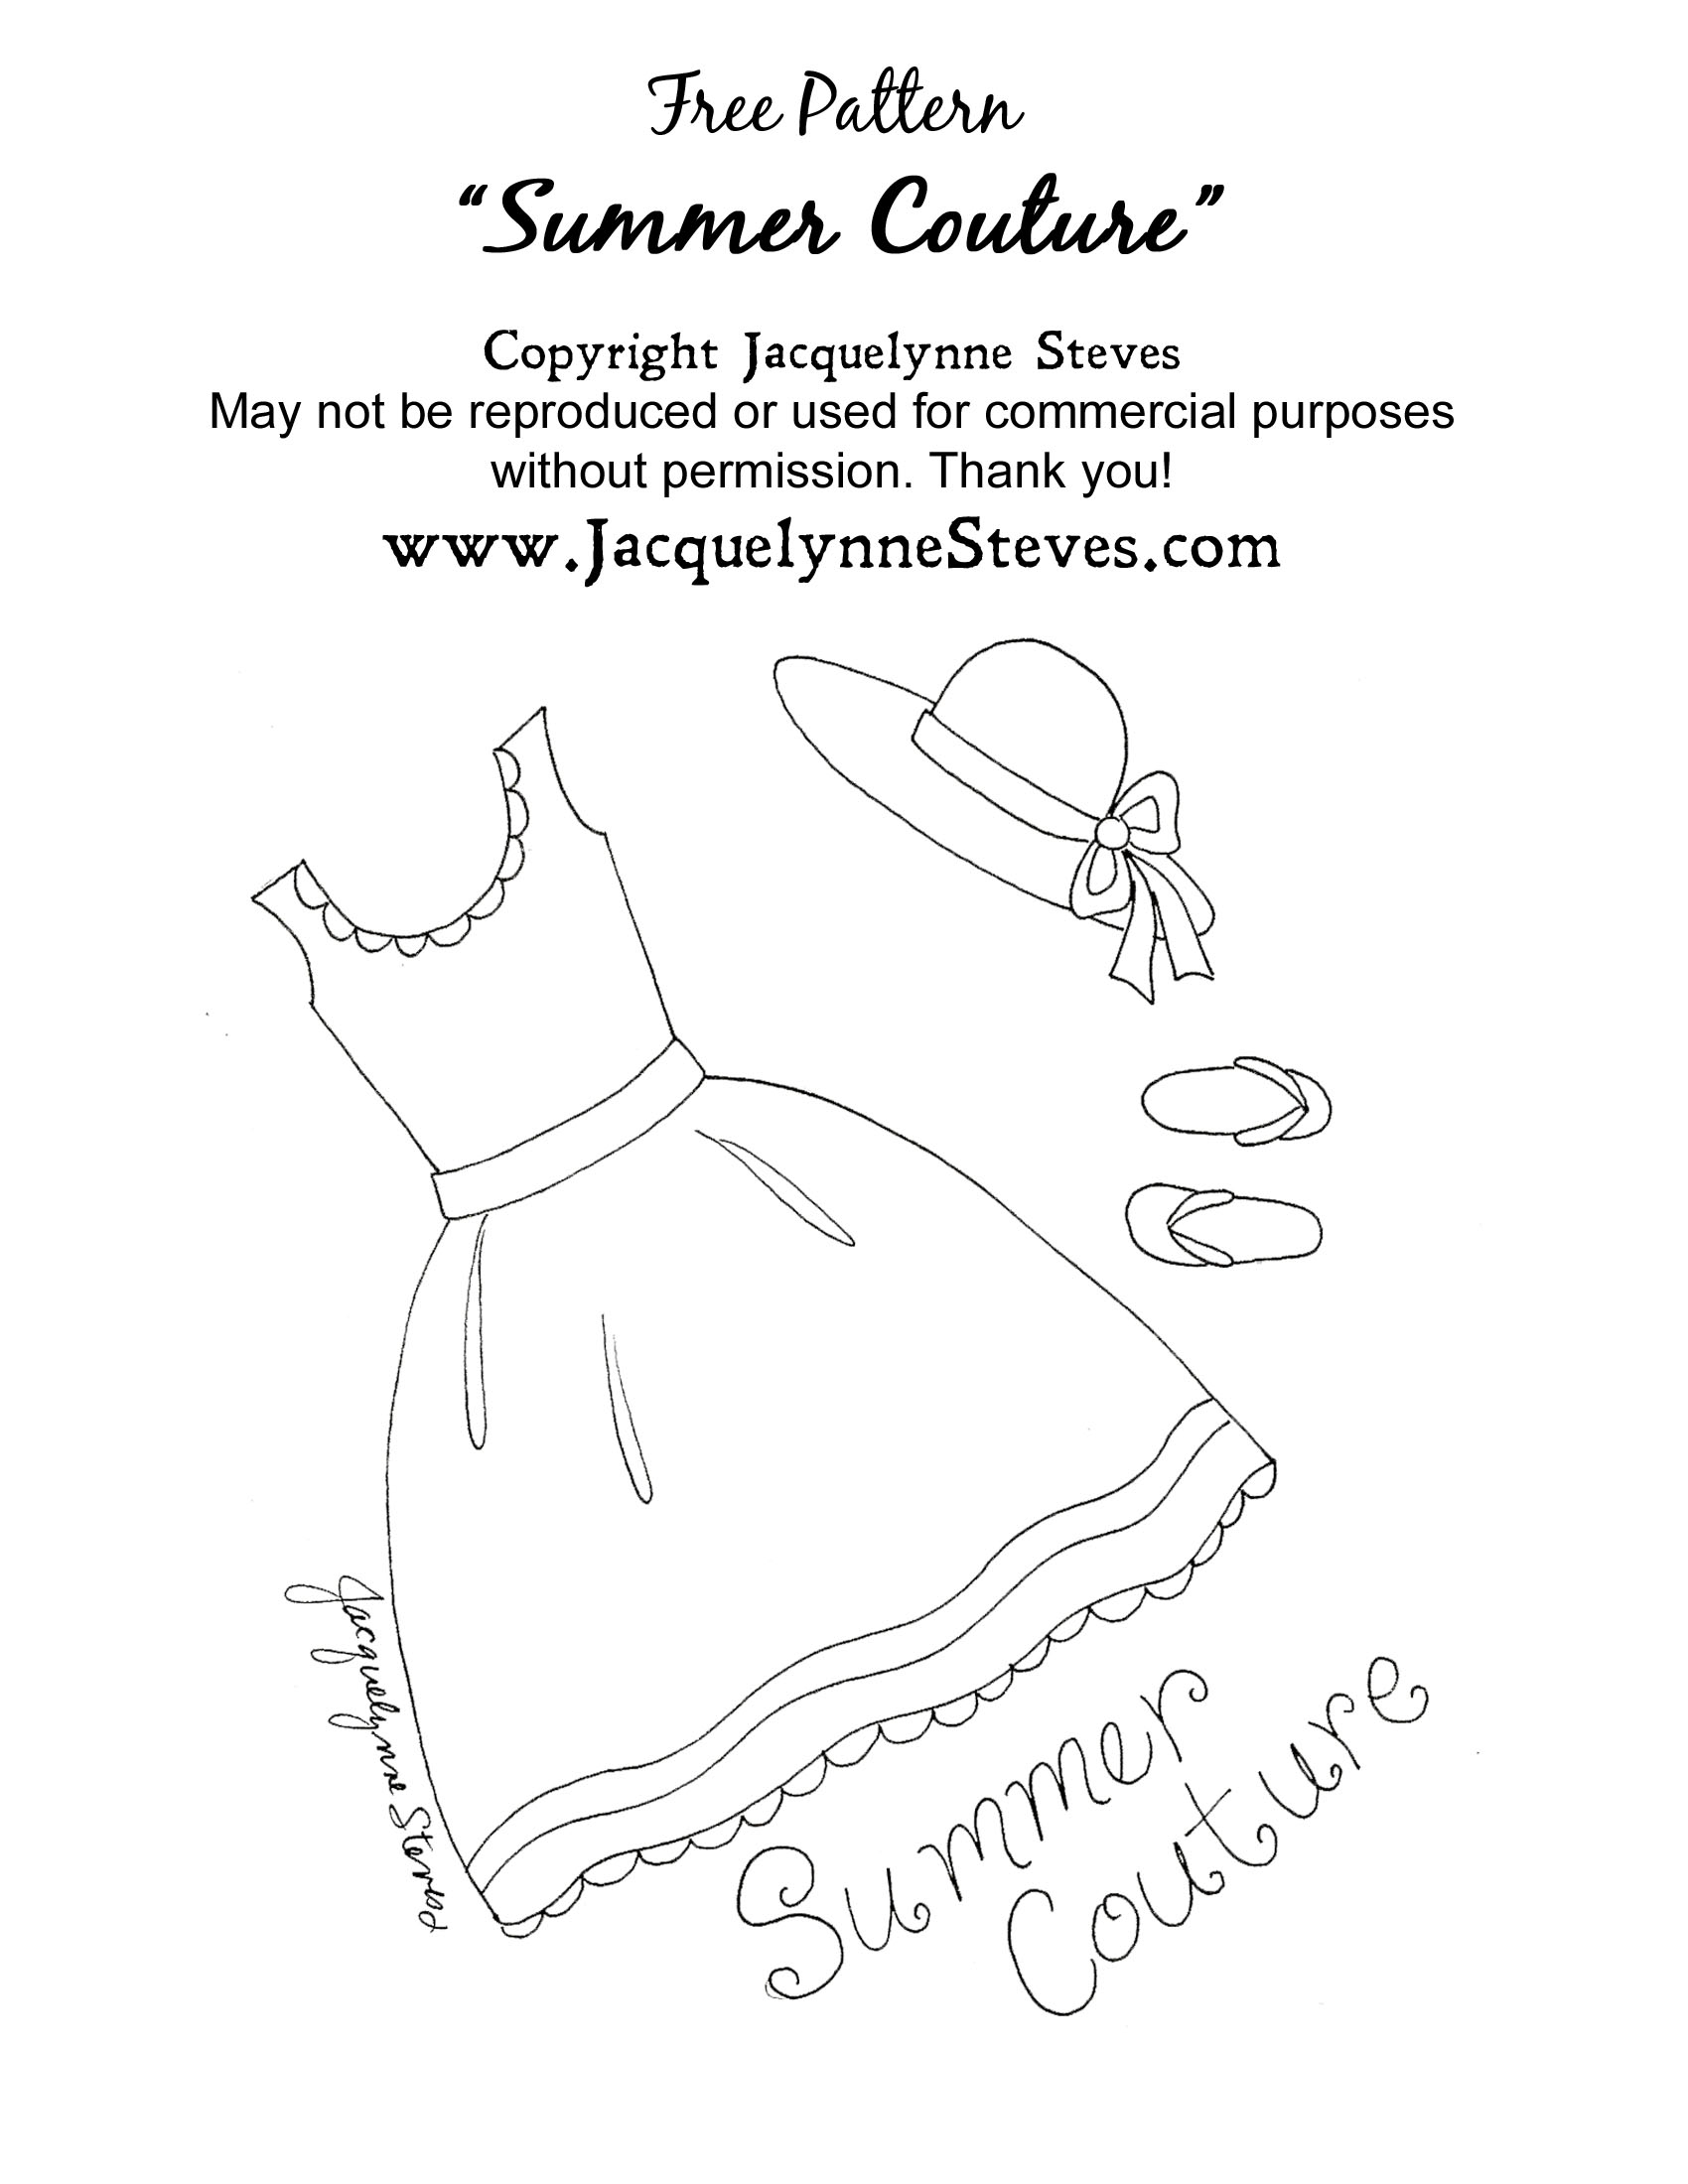 Make Embroidery Pattern Free Summer Couture Embroidery Pattern Jacquelynne Steves